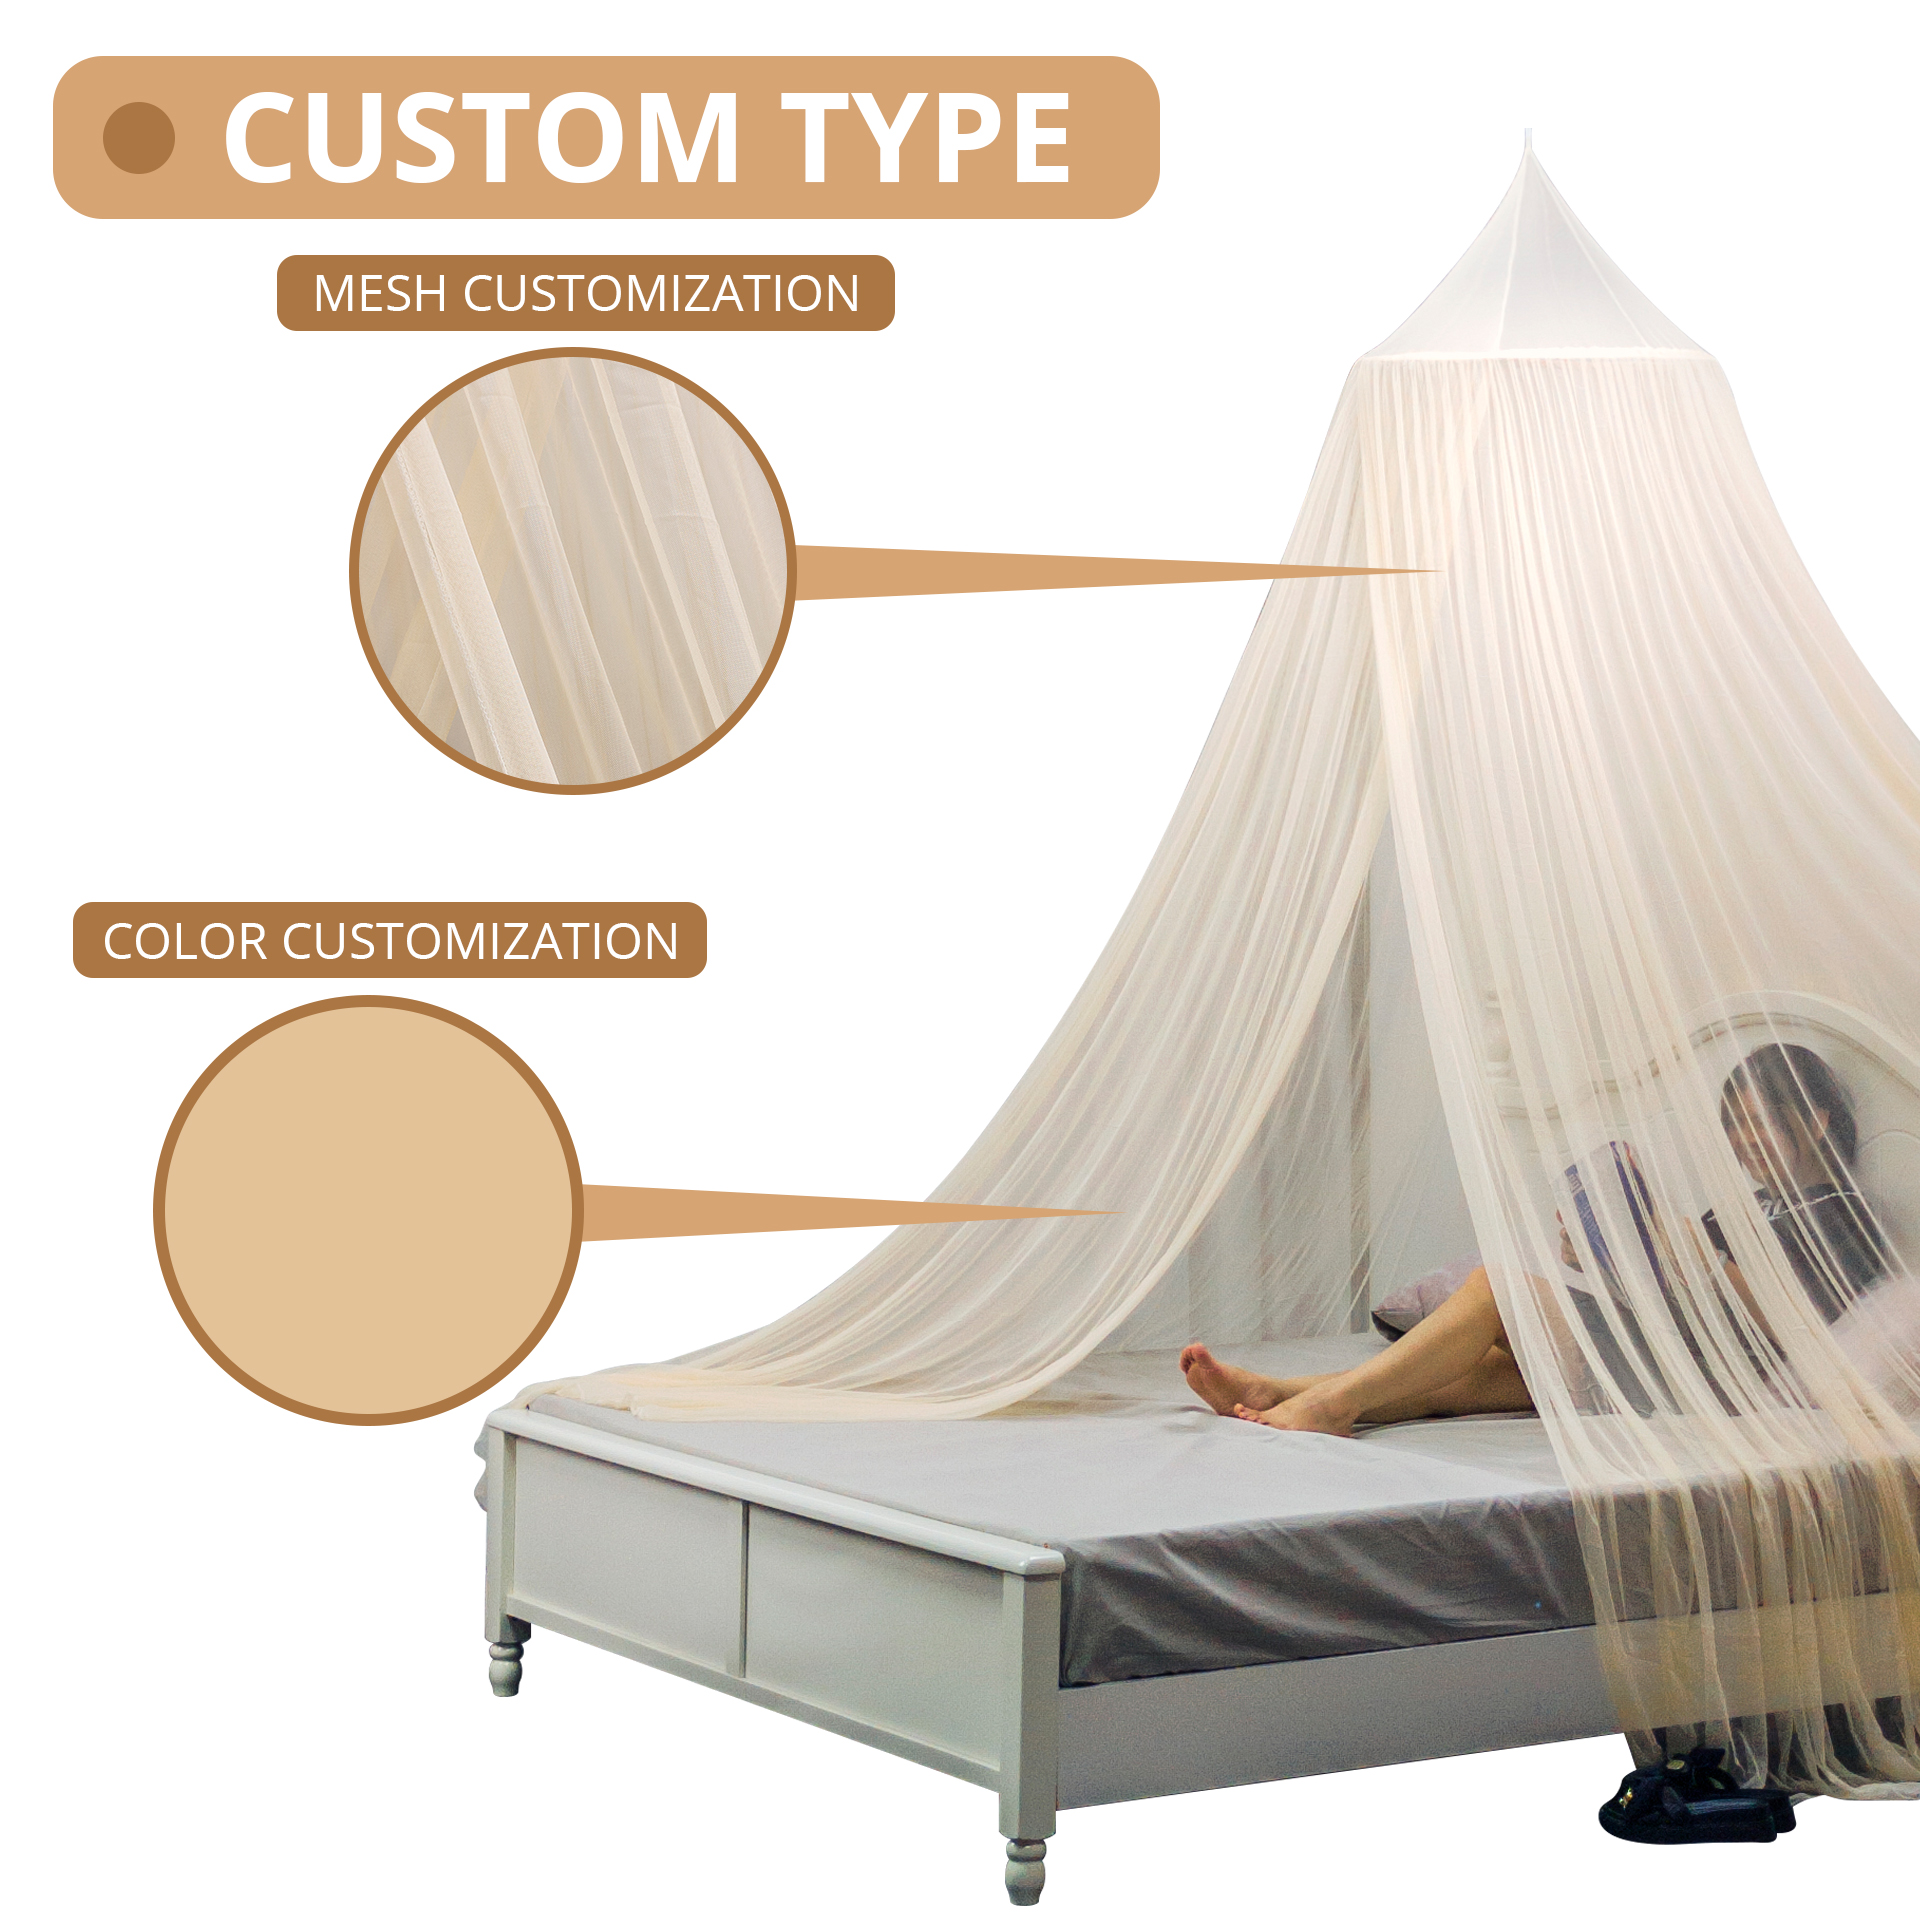 Enlarged Umbrella Polyester Mosquito Net For Bed